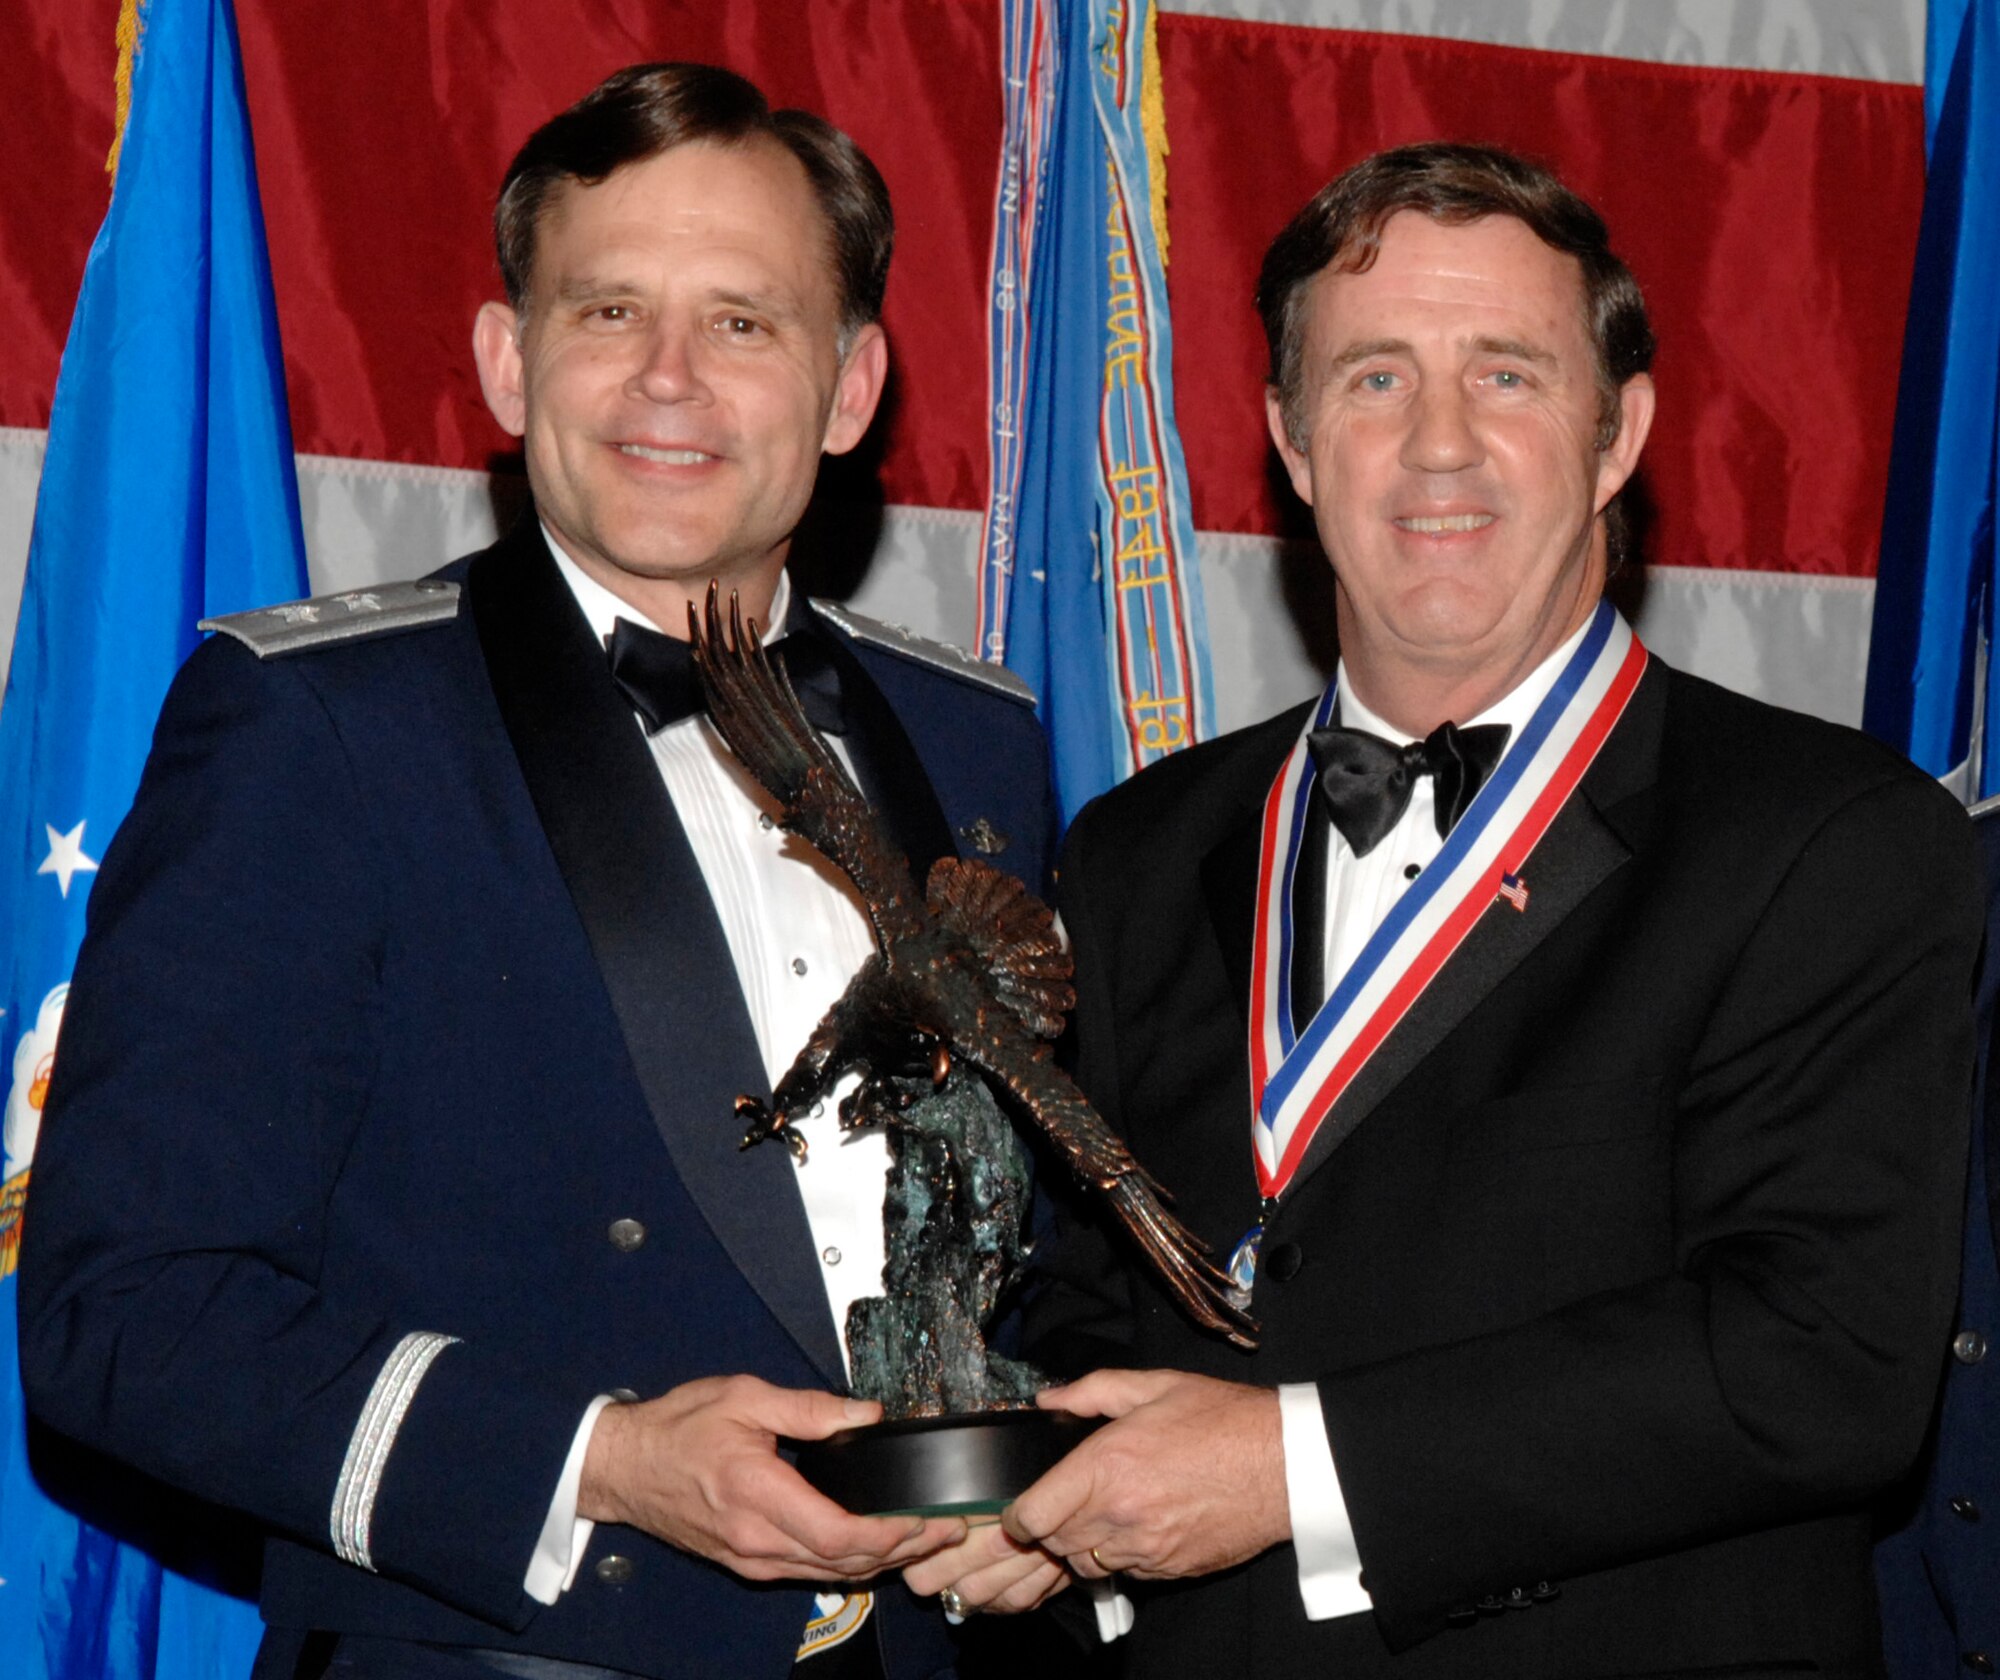 Kevin Burns, 53d Test Management Group, won the 53d Wing Category 5 Civilian of the Year Award during the annual awards banquet Jan. 31at the Emerald Coast Conference Center.  The night’s guest speaker and former 53d commander, Maj. Gen. (retired) Jack Catton (left) presented the awards. U.S. Air Force photo.